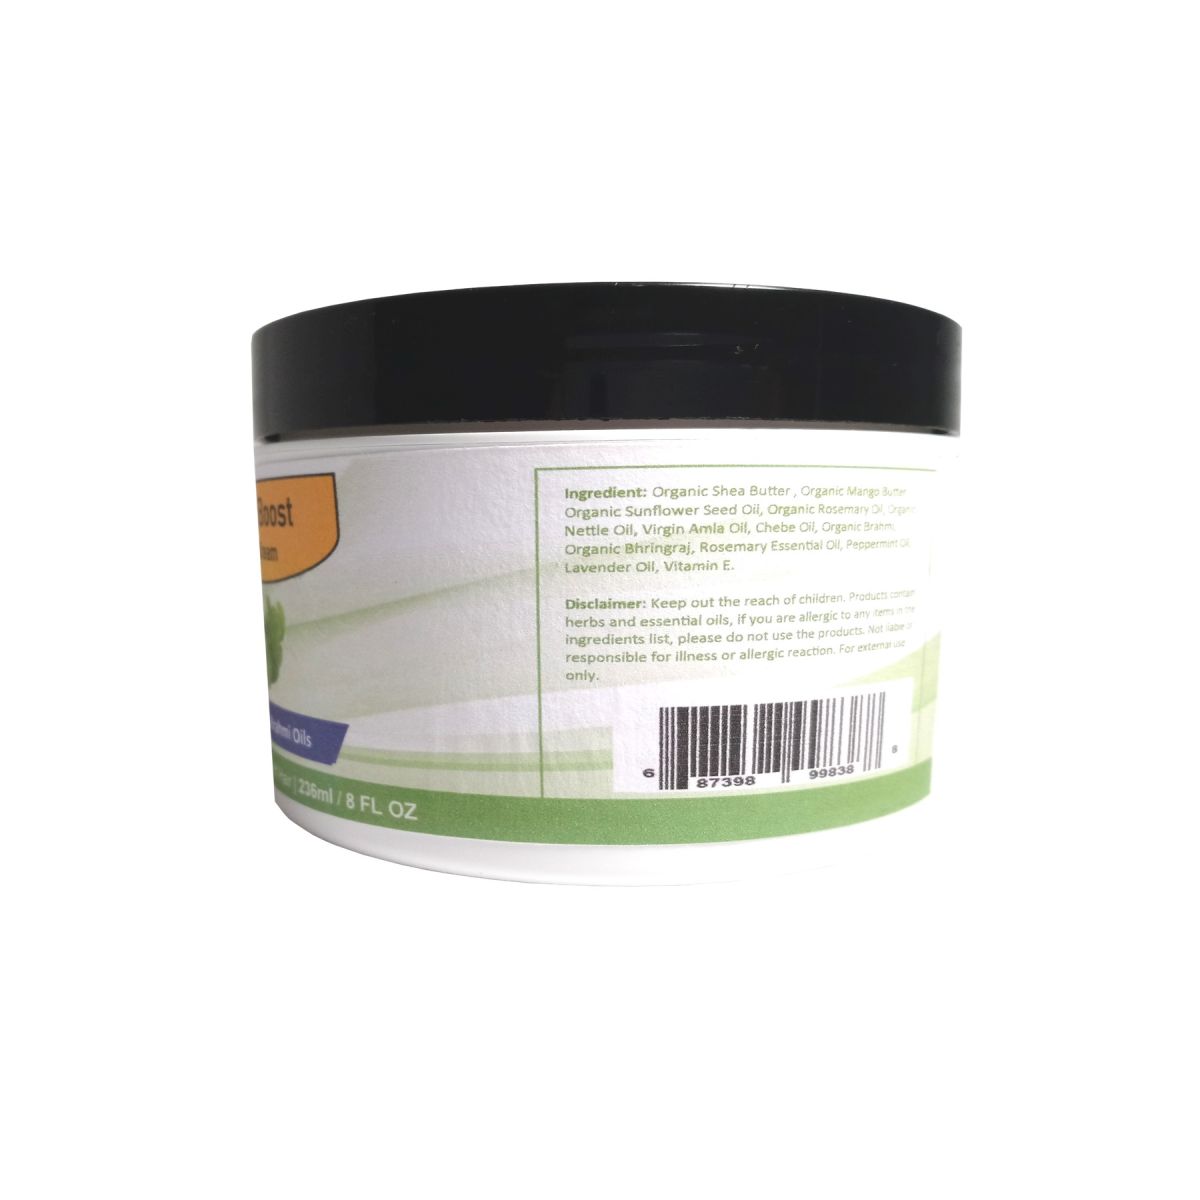 Herbal Boost Natural Hair Styling Cream